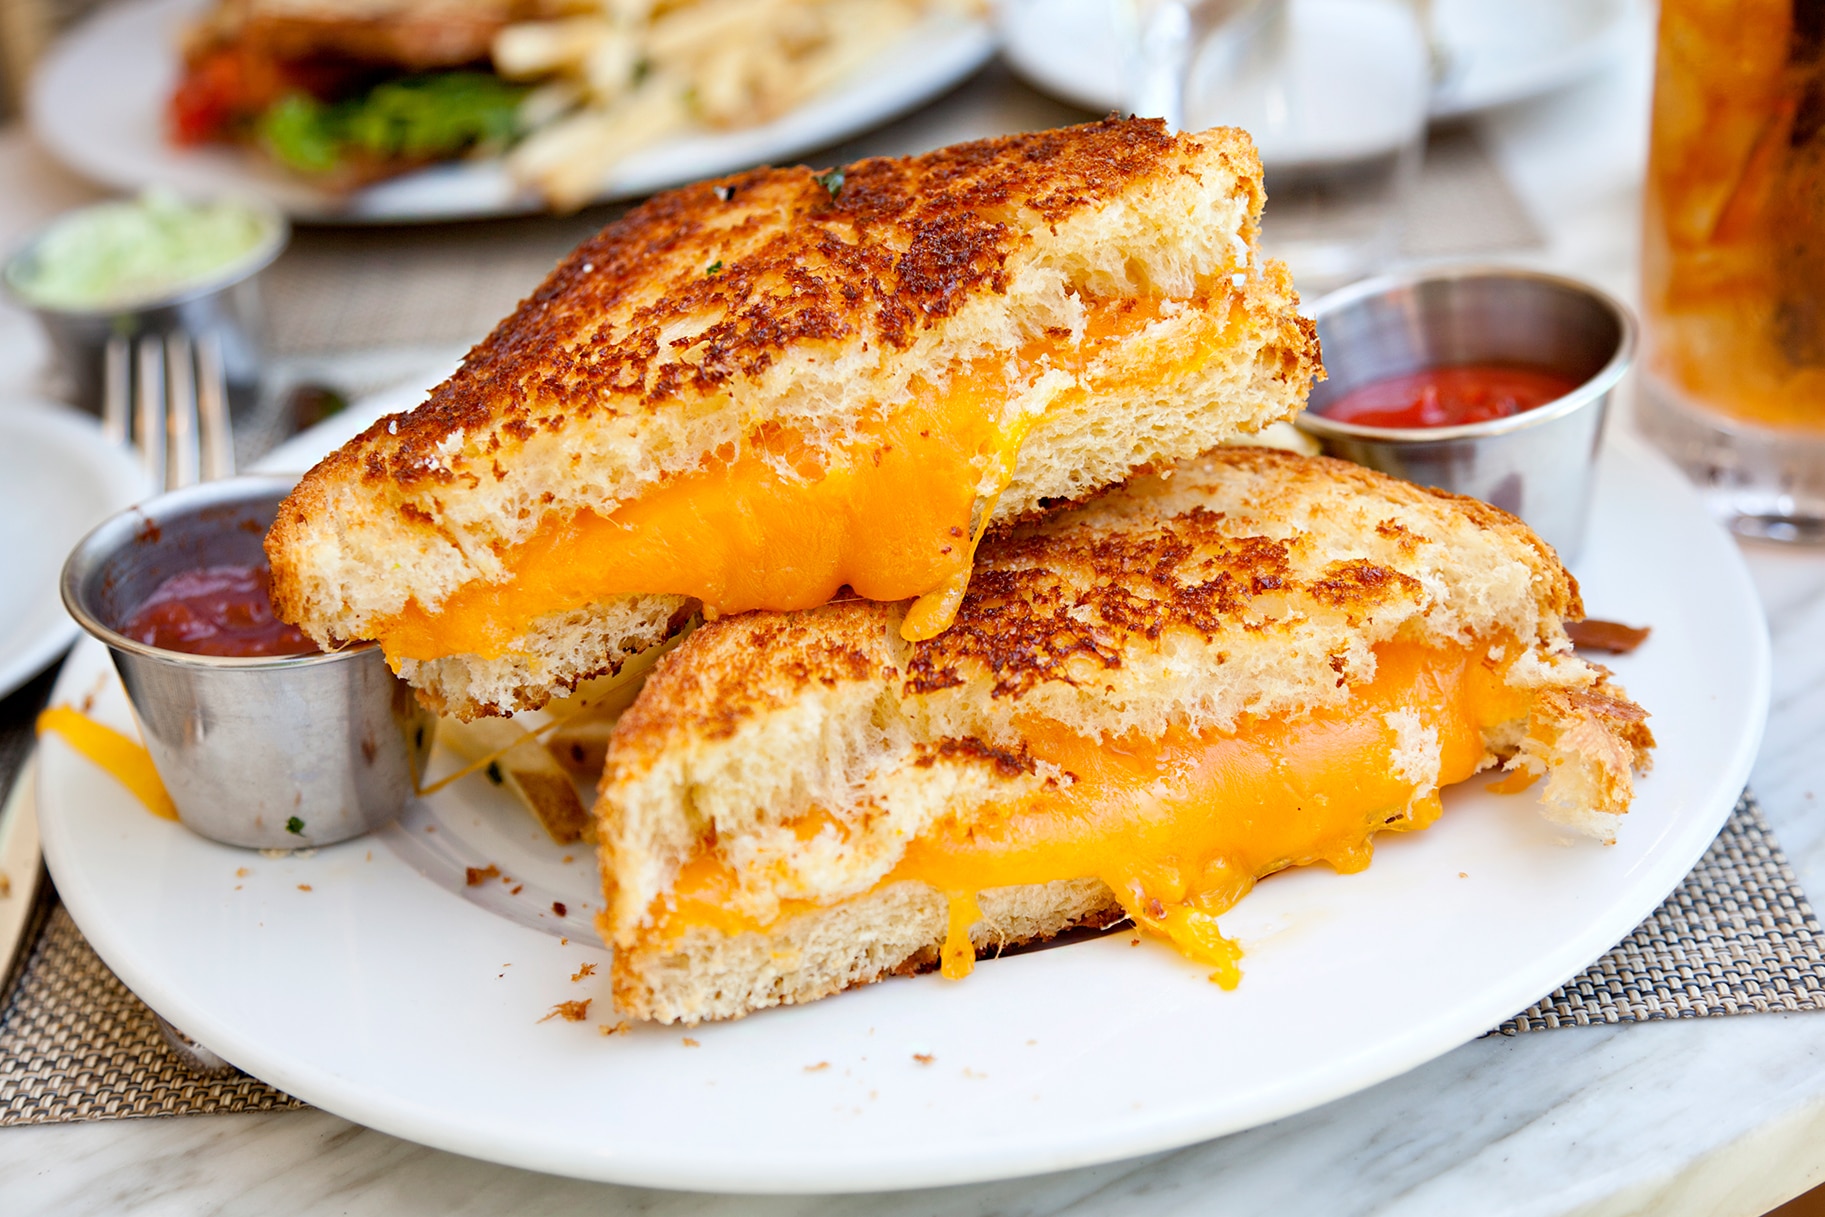 https://www.bravotv.com/sites/bravo/files/field_blog_image/2016/05/the-feast-grilled-cheese-tips-promote_1.jpg